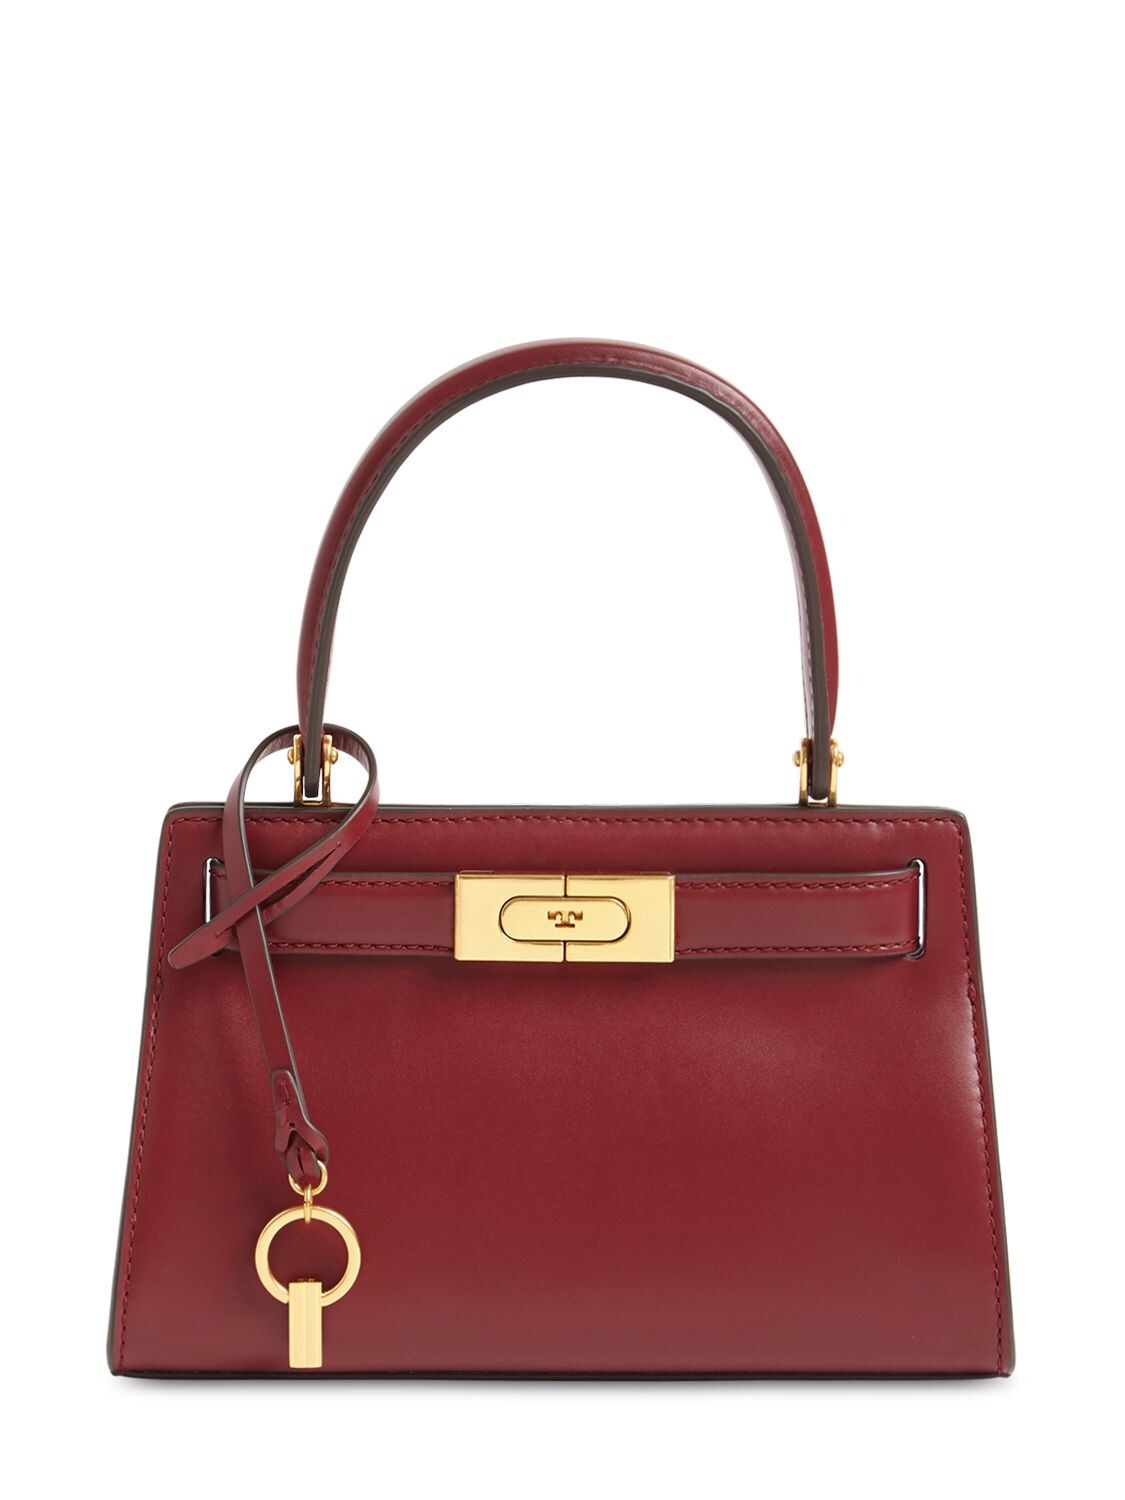 Tory Burch Lee Radzwill Leather Bag In Tinto